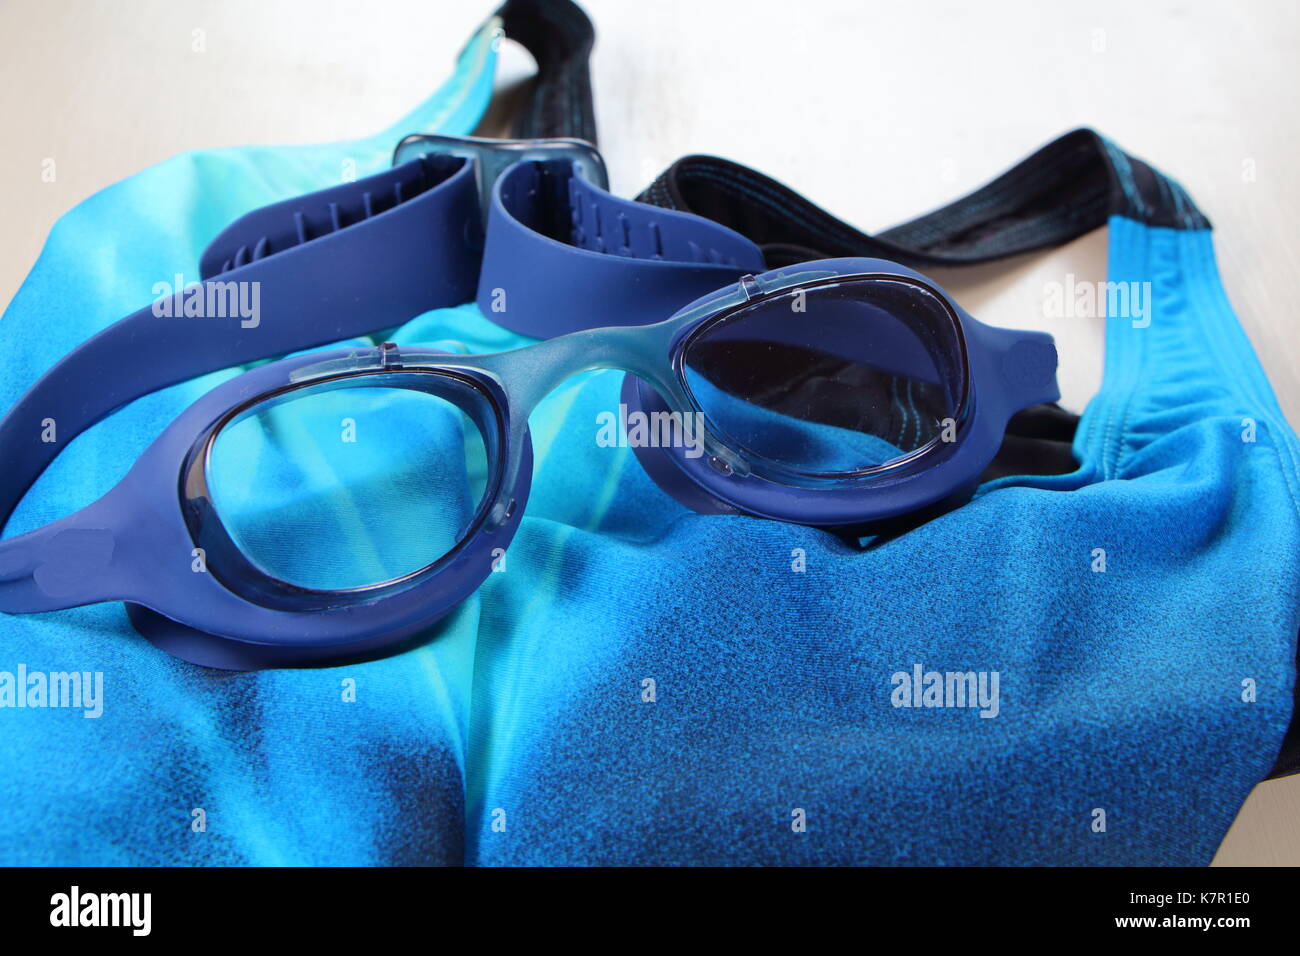 Blue swimming goggles and blue swimsuit for bathing in swimming pool Stock Photo